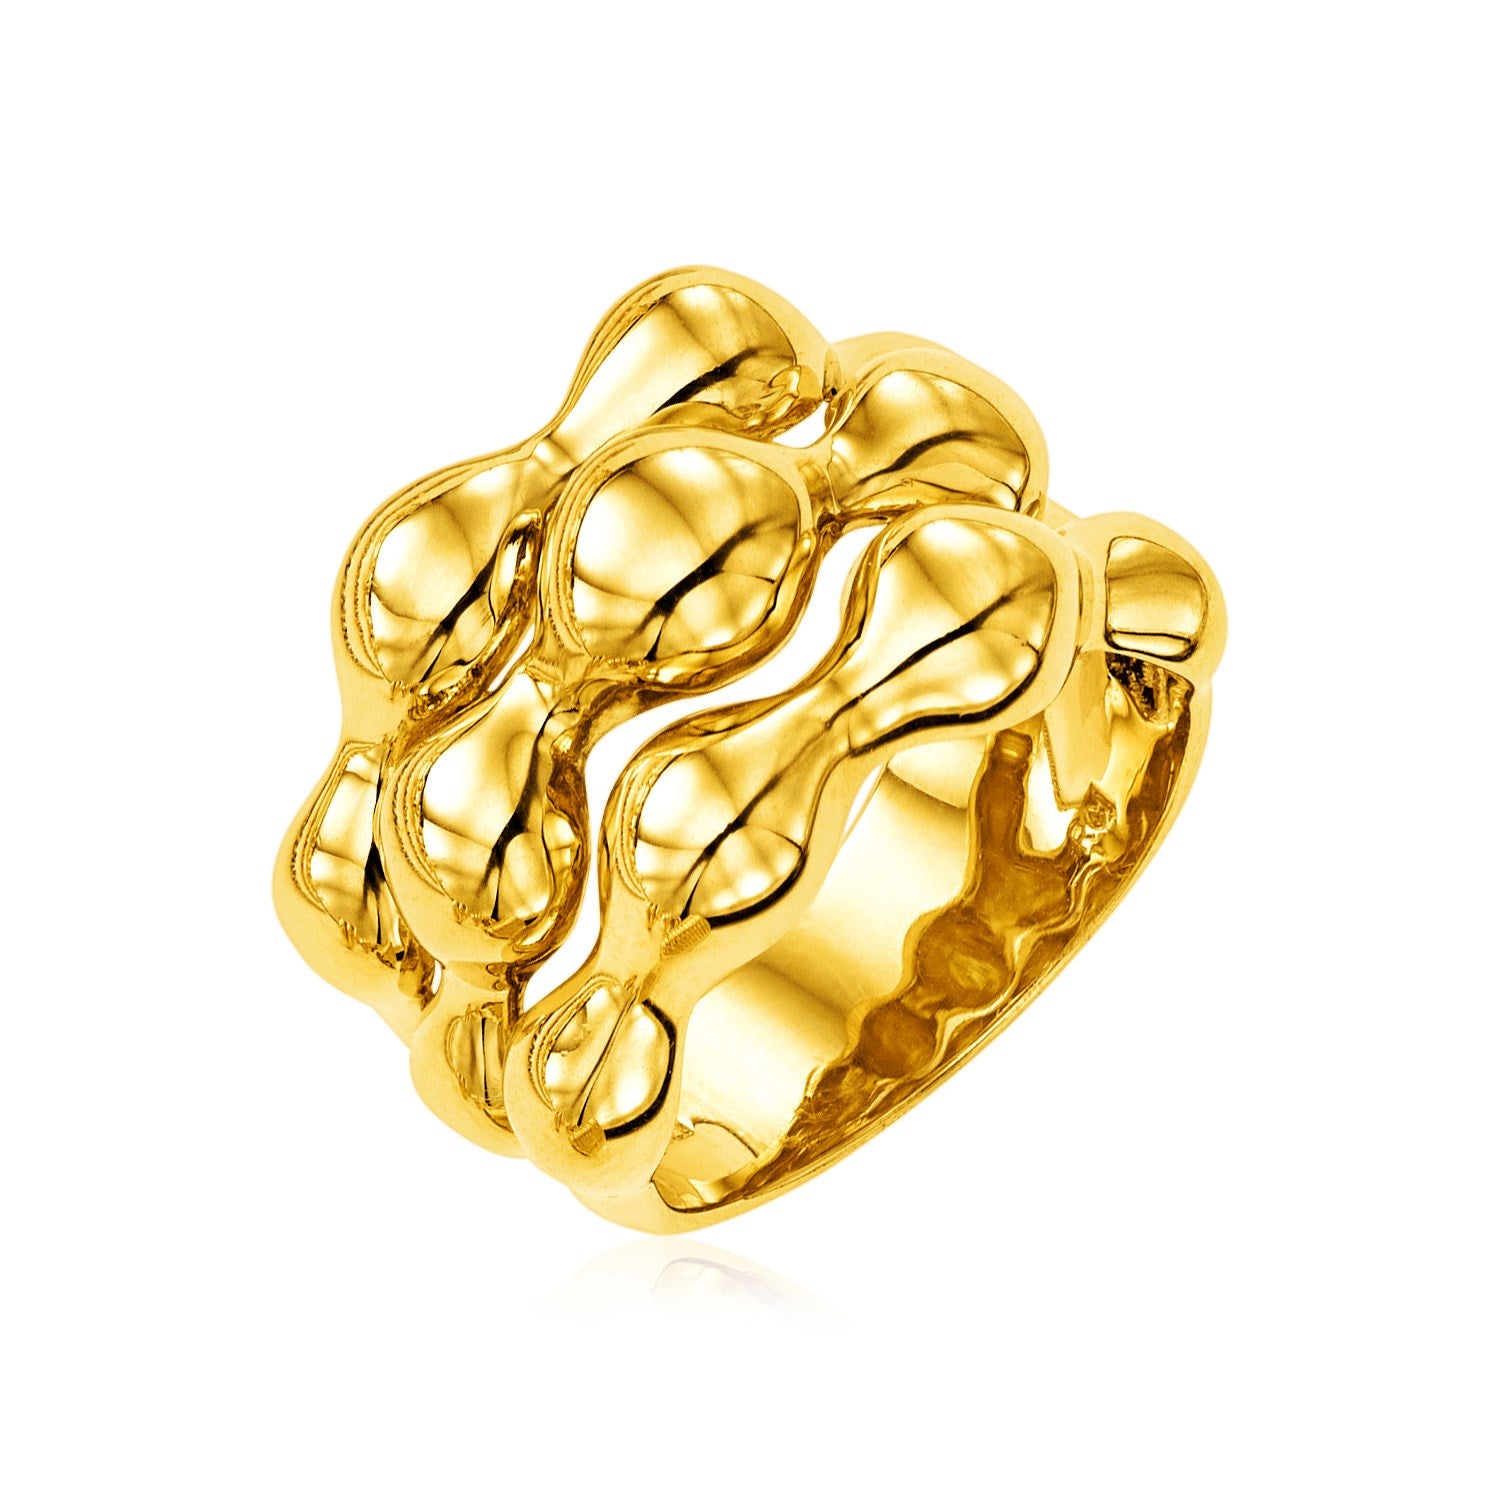 14k Yellow Gold Polished Bubble Shaped Ring